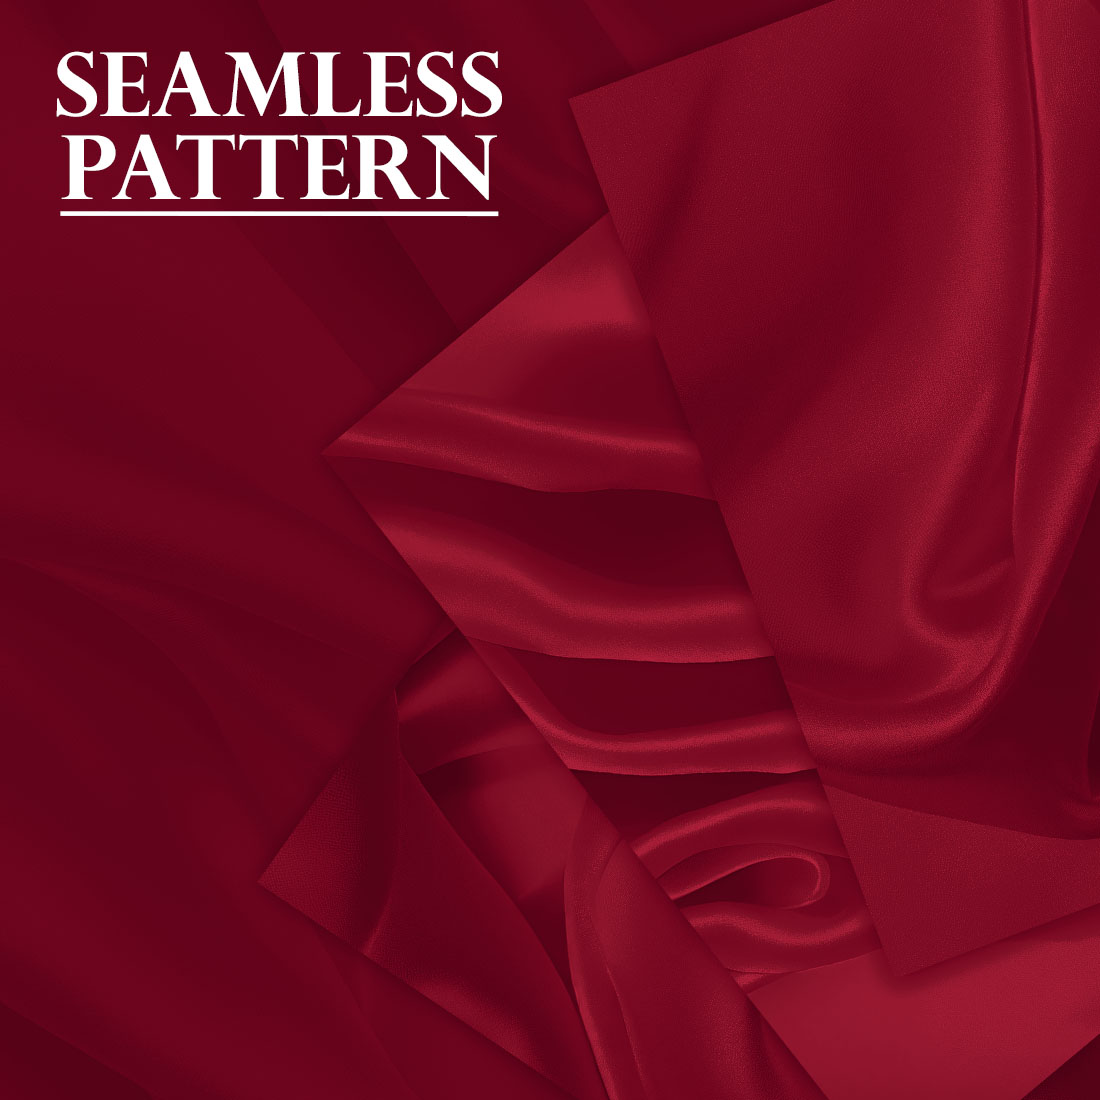 Pack of images with beautiful patterns of burgundy silk.